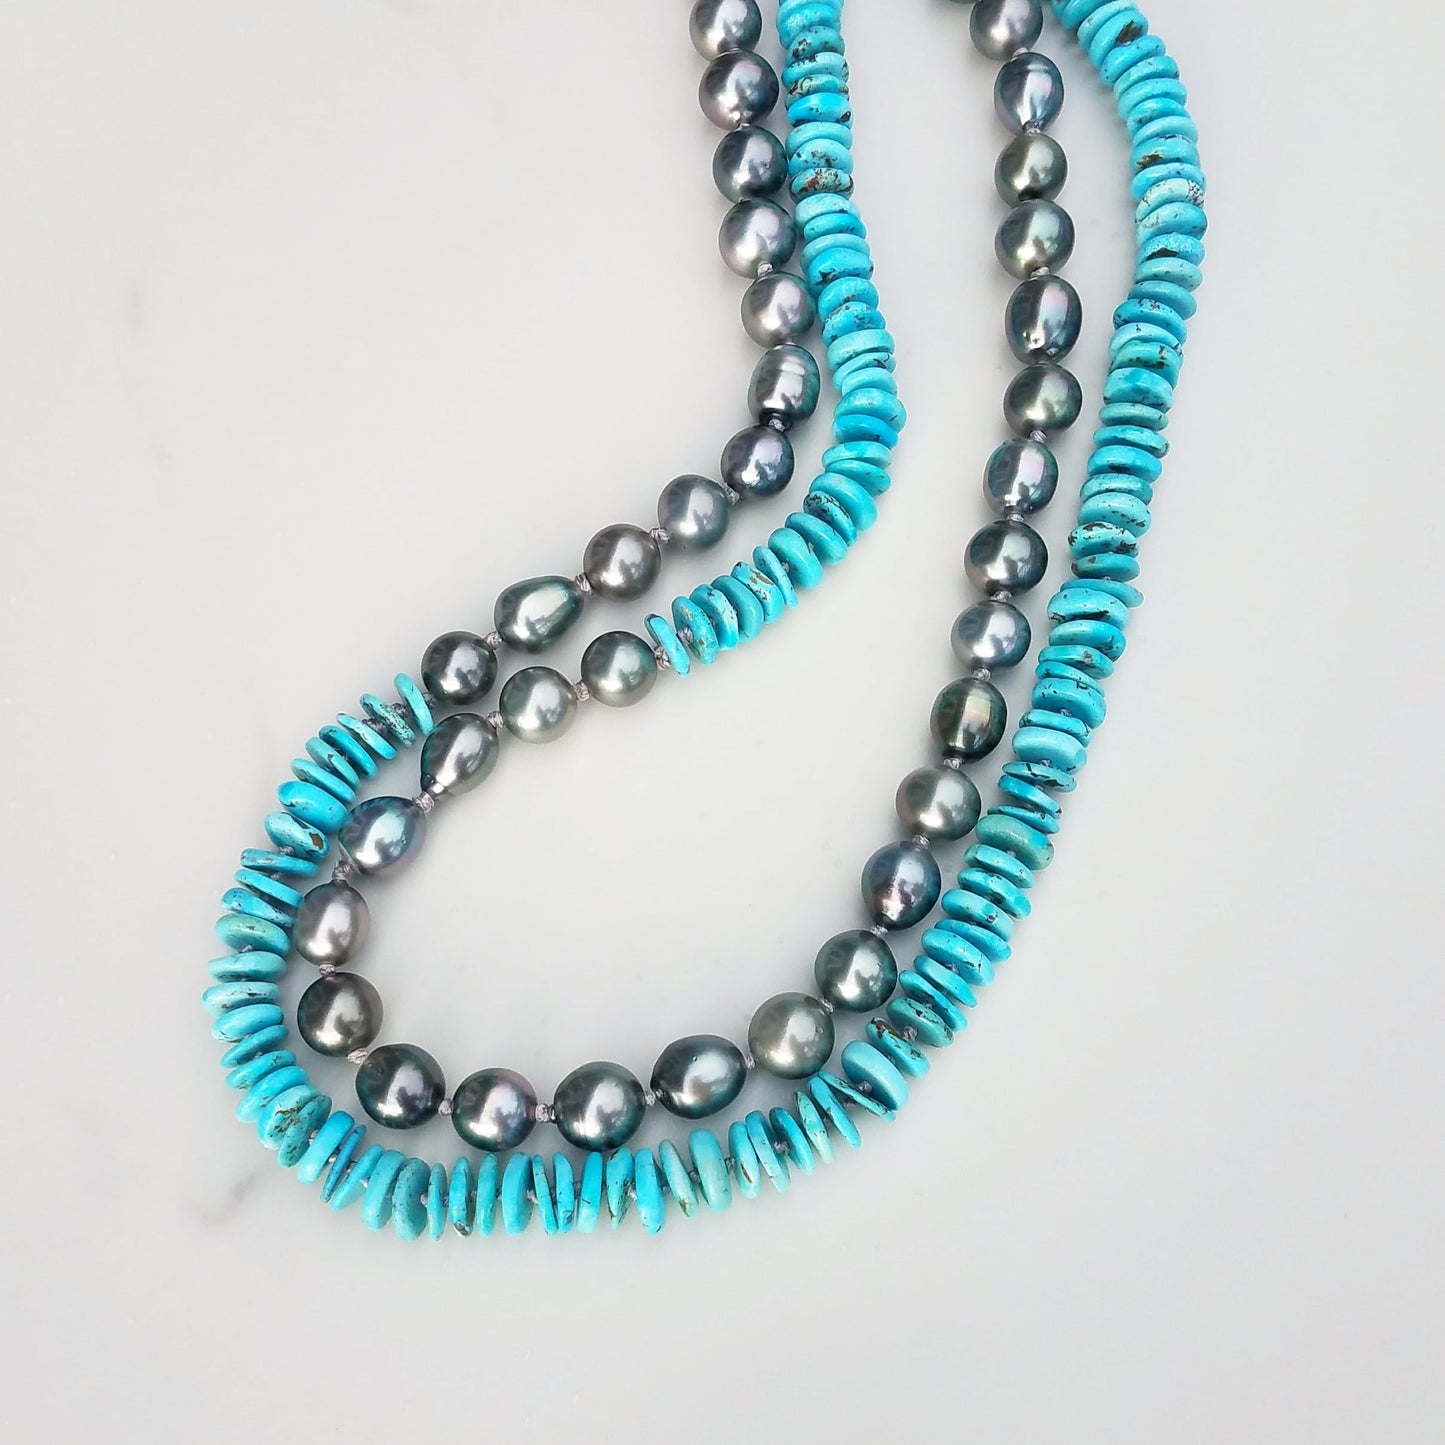 Light Turquoise & Silver Tahitian Pearl Helix Necklace